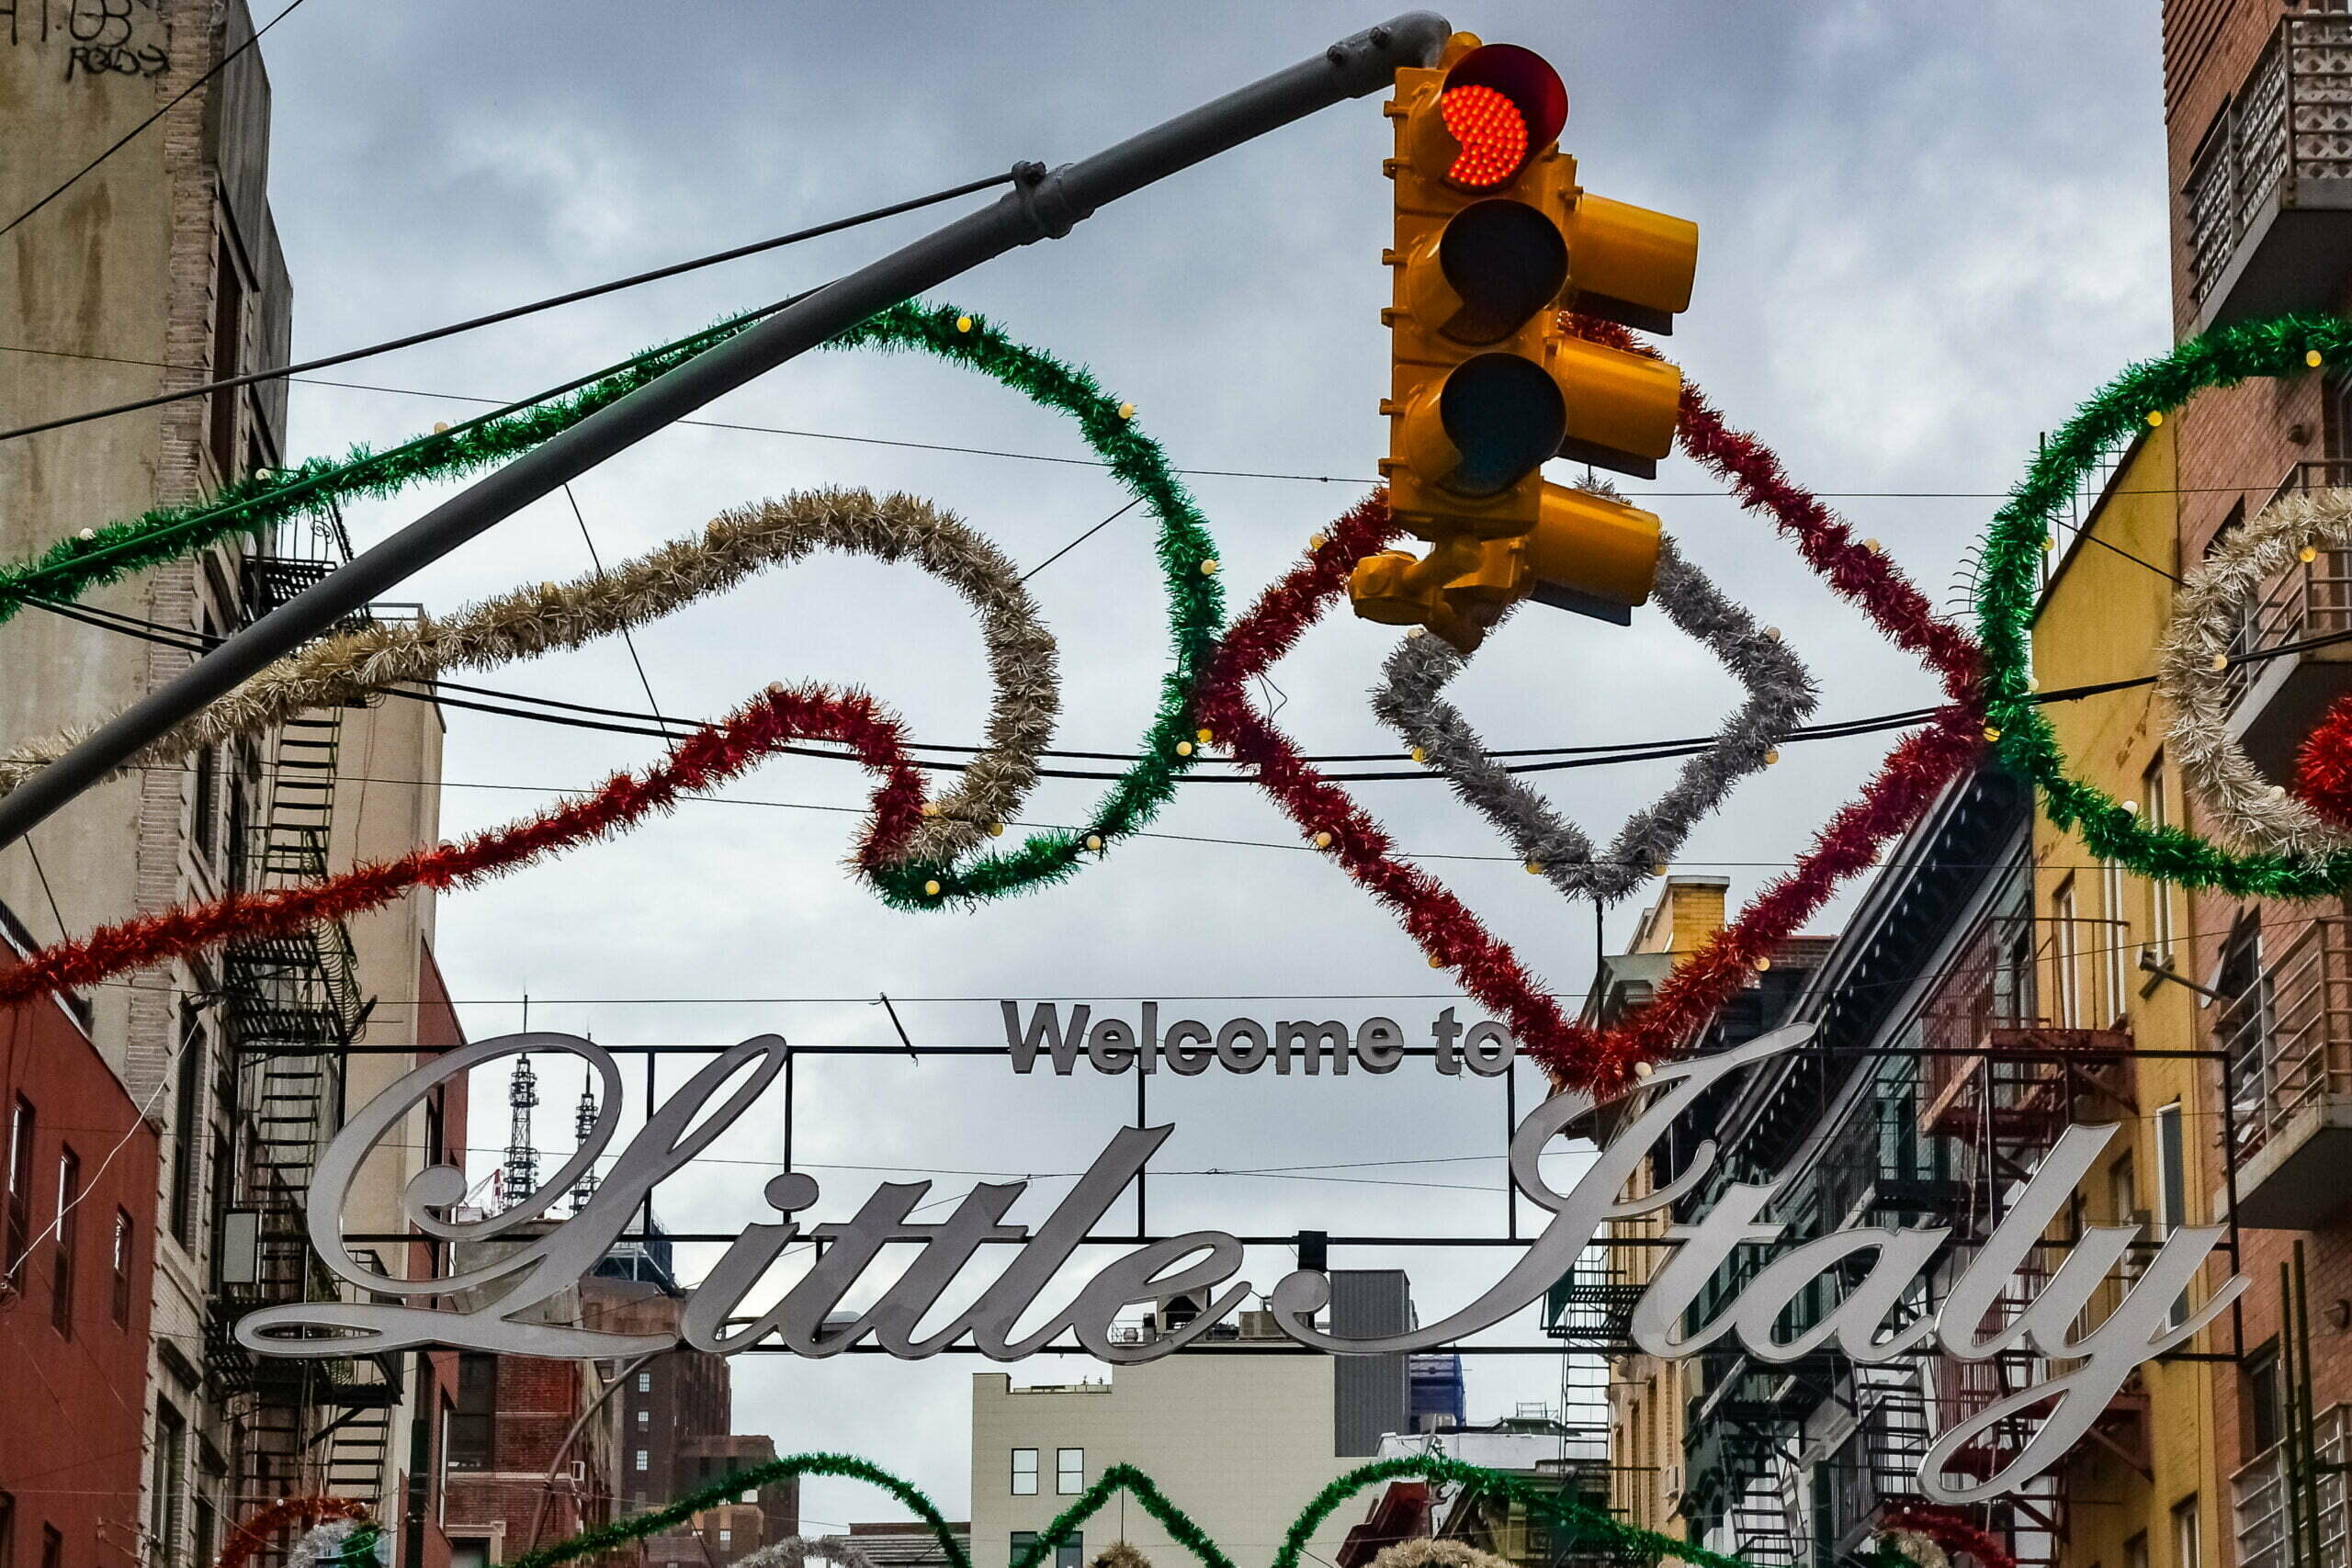 The entrance of little Italy, stoplight with Christmas garlands in the background.